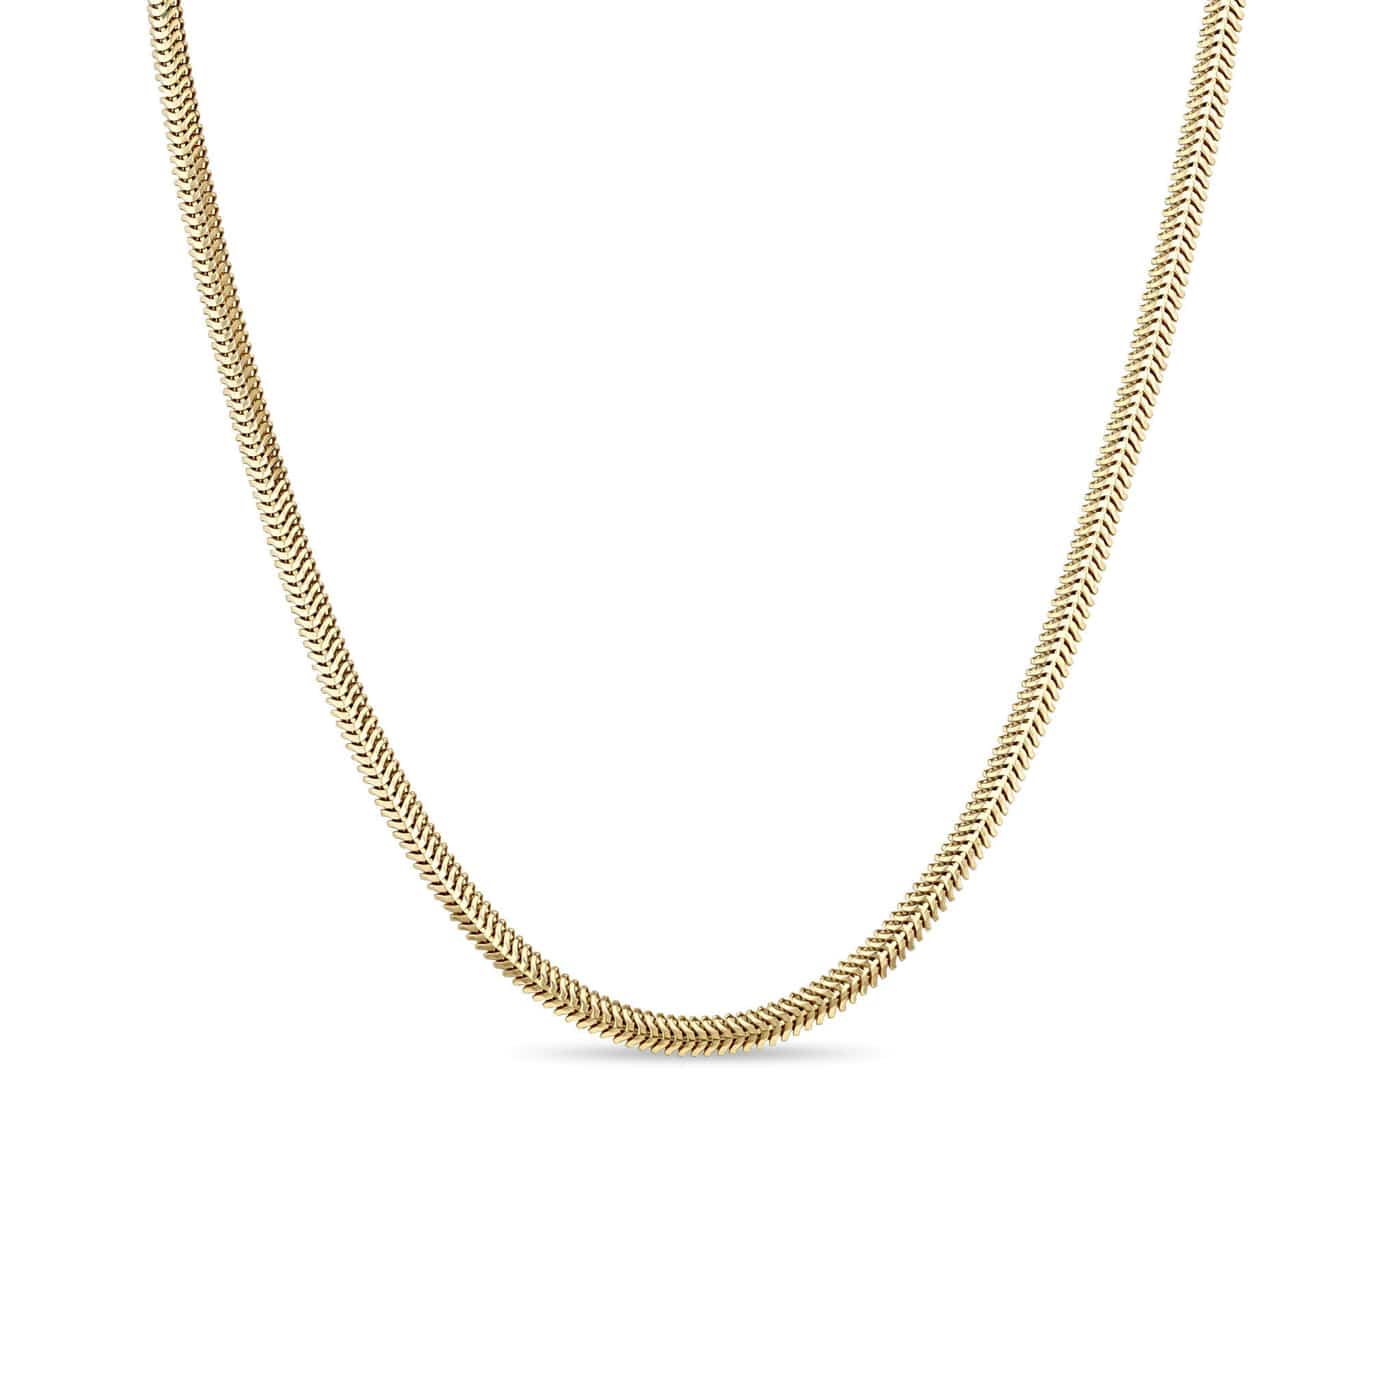 NKL-14K 14k Yellow Gold Small Oval Snake Chain Necklace